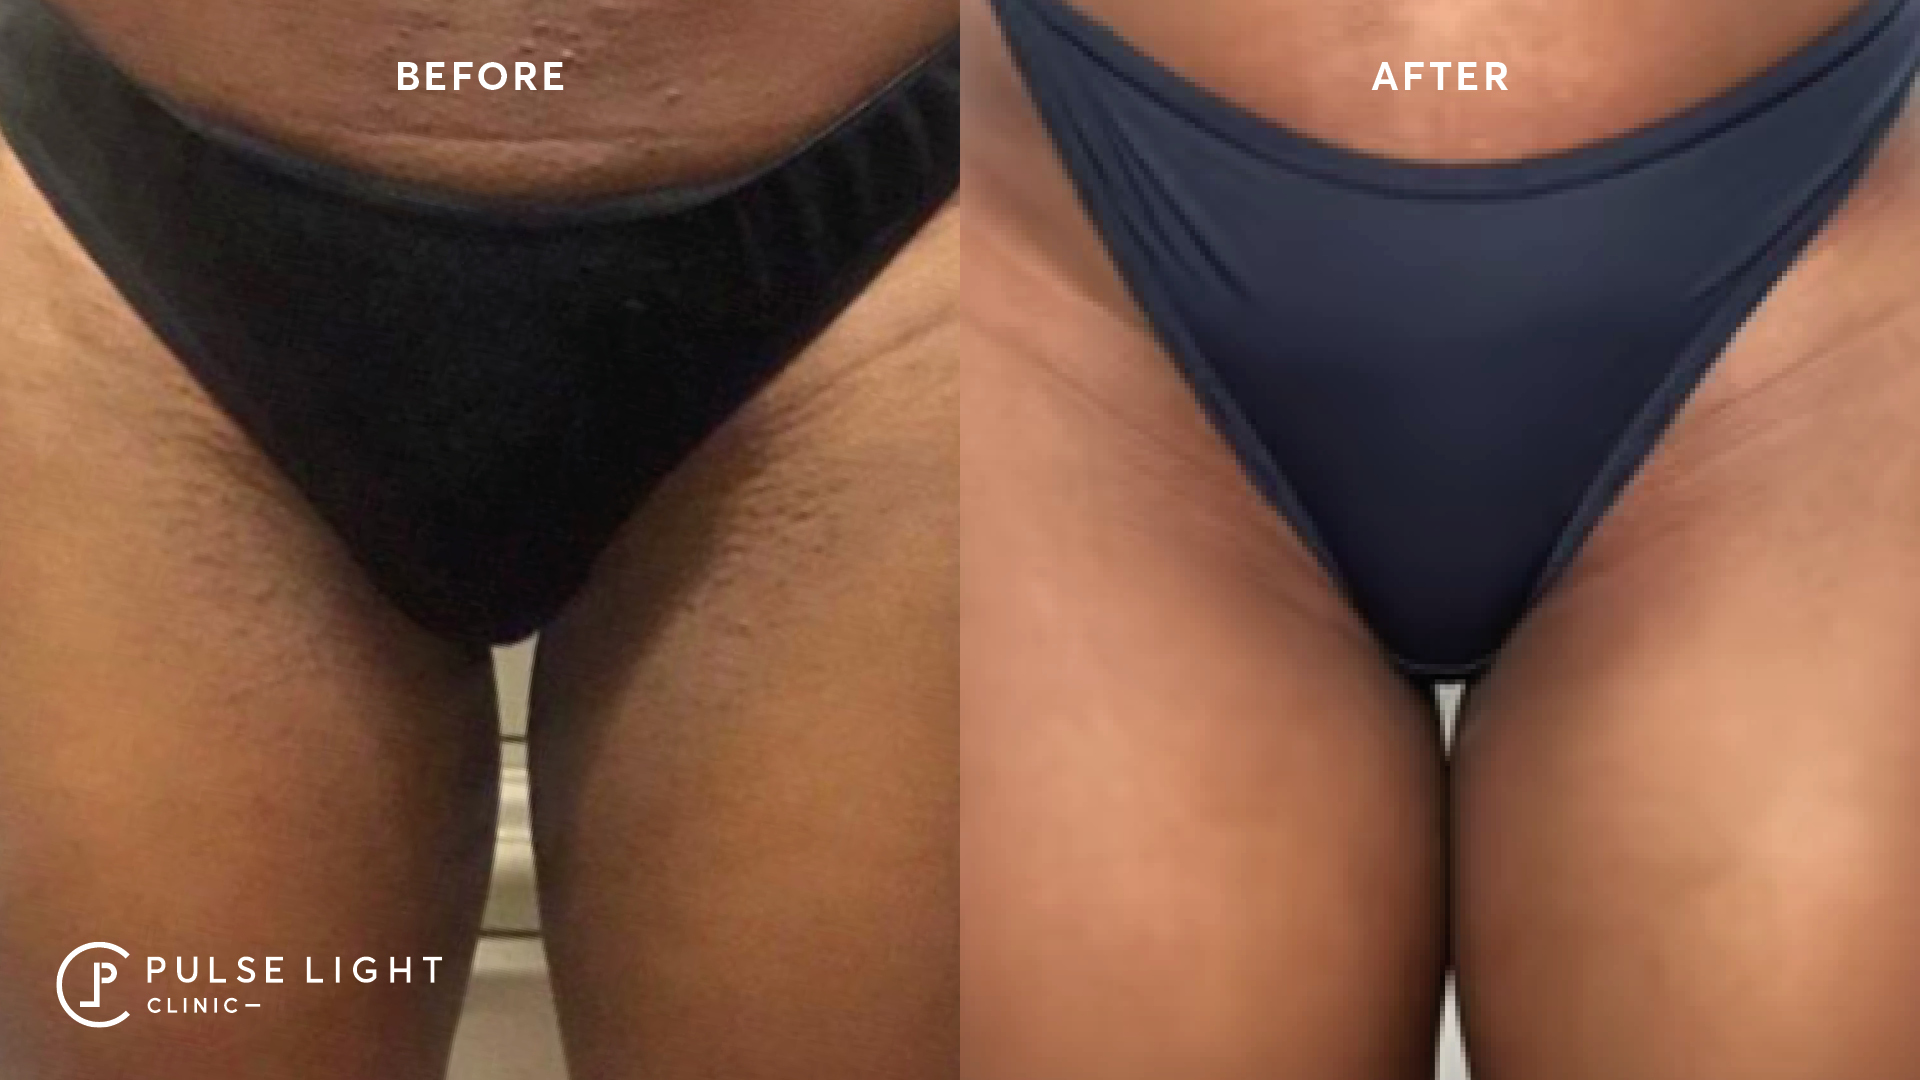 Pulse Light Clinic sur Twitter : "Our client results: Before and after laser hair removal treatments for ingrown hairs and PCOS with an expert from home! - Schedule a phone consultation